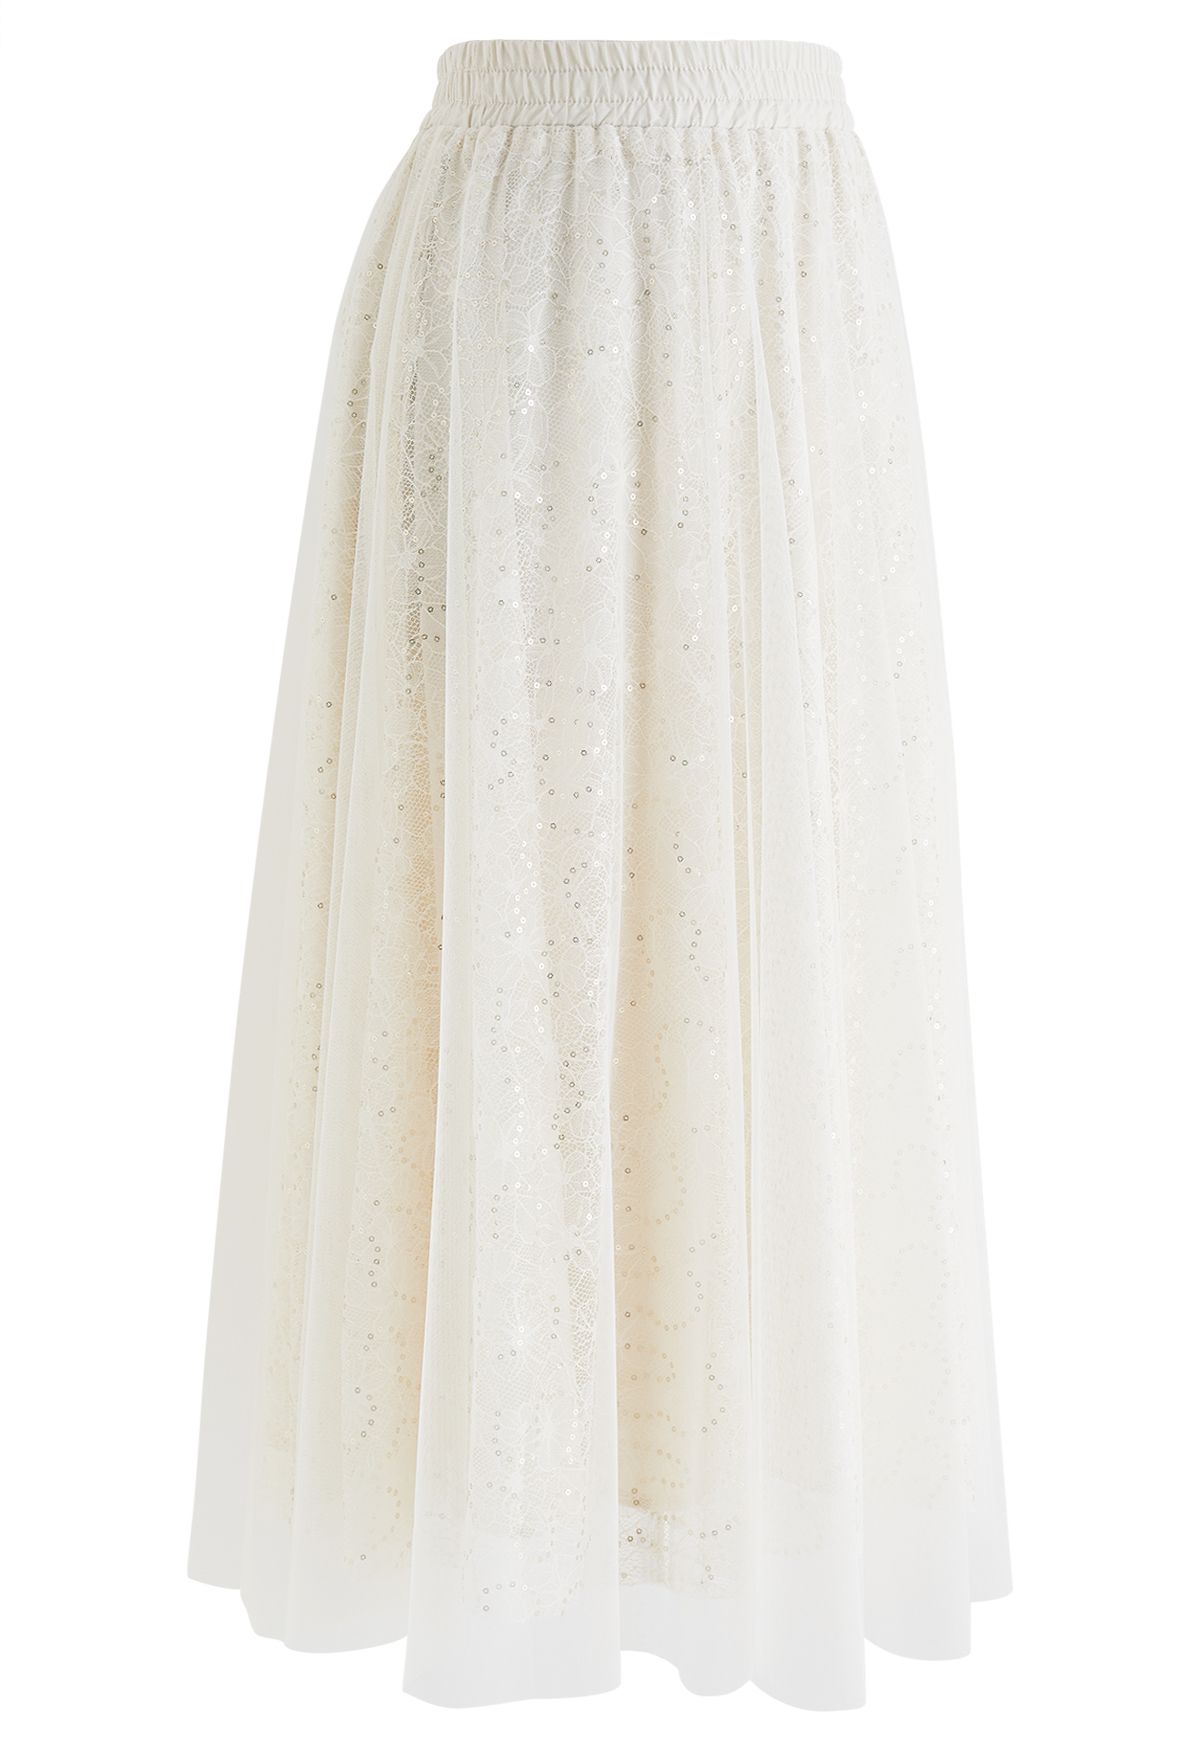 Sequined Floral Lace Mesh Tulle Skirt in Cream